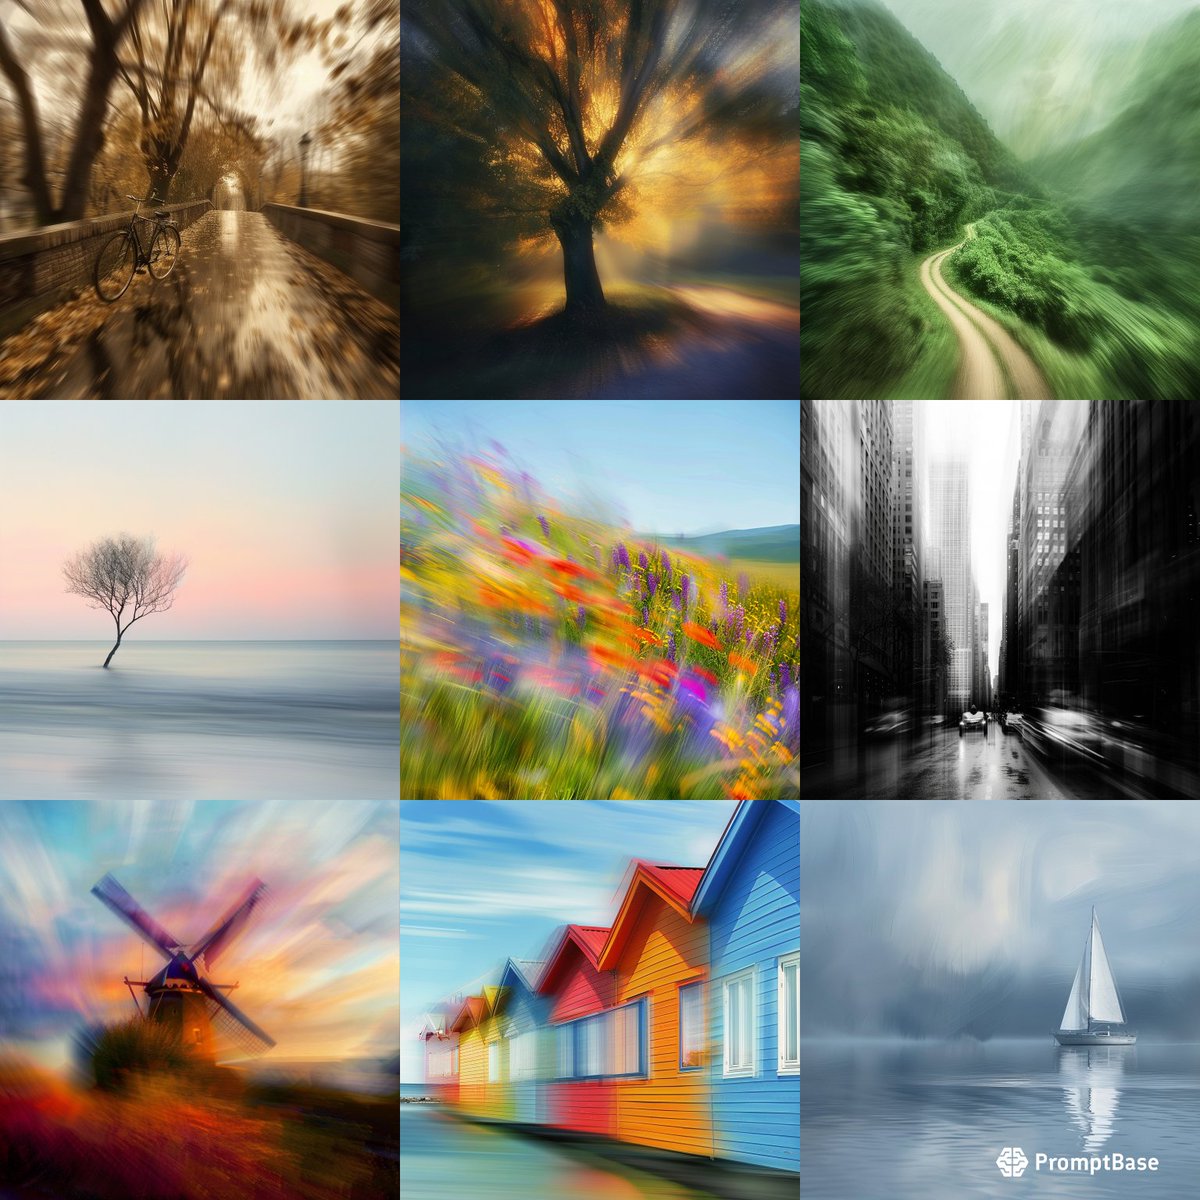 Artistic Blurs by jorgelicious using #midjourney 🎨